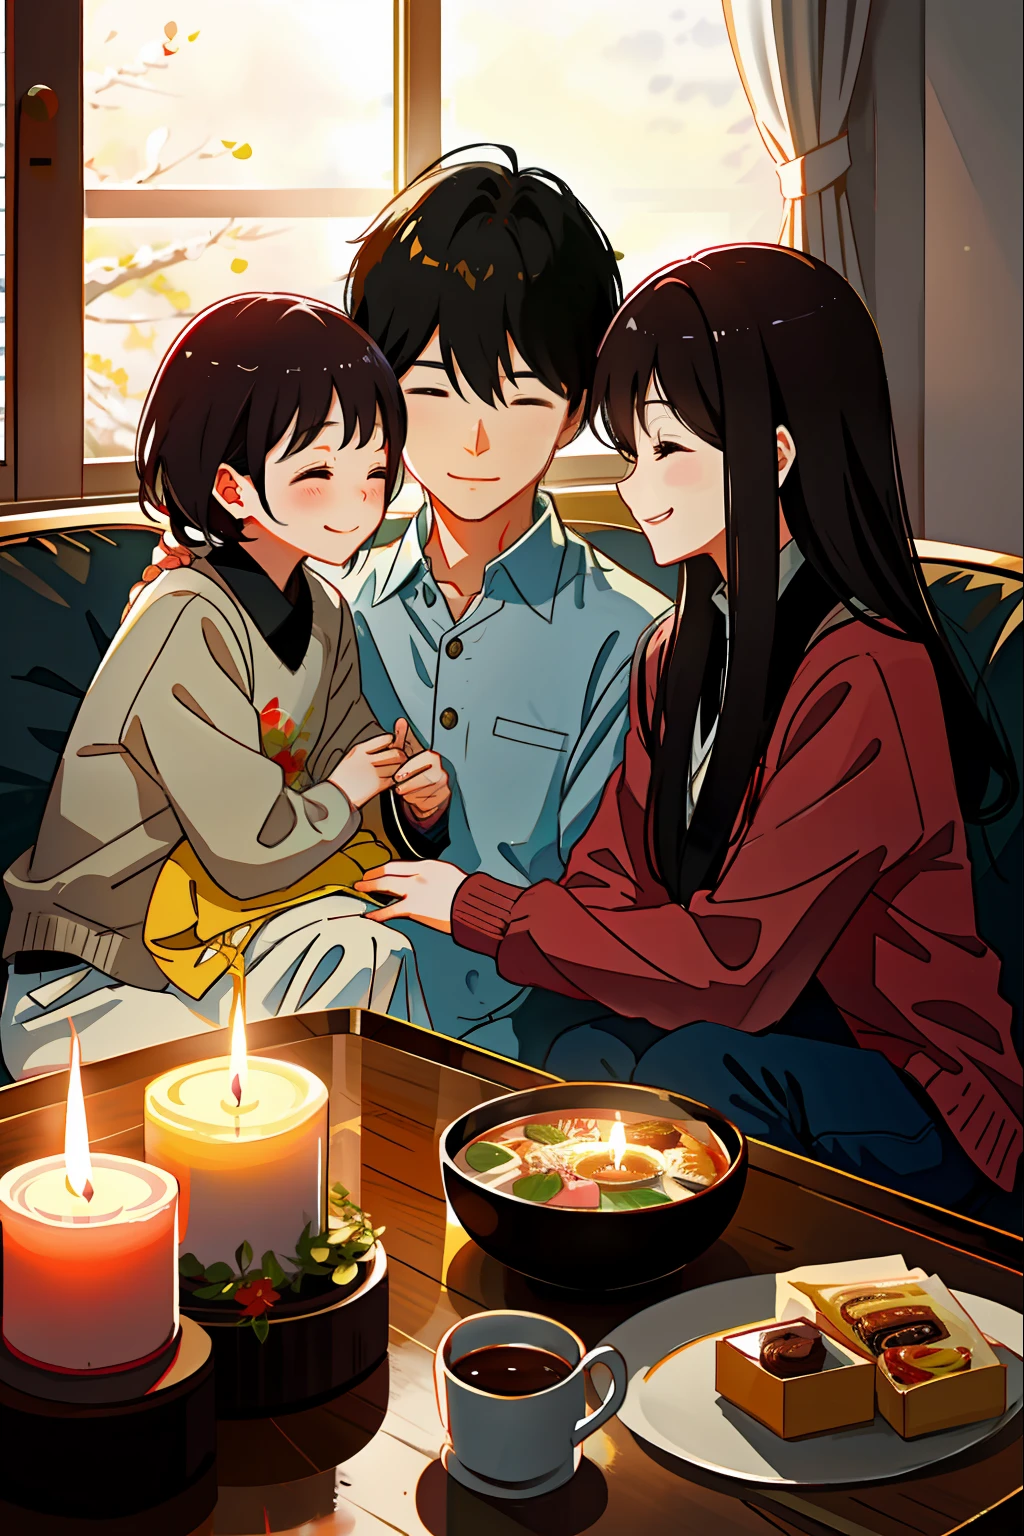 Family time、Warm、blissful、Intimate interaction with parents、Sweet smile